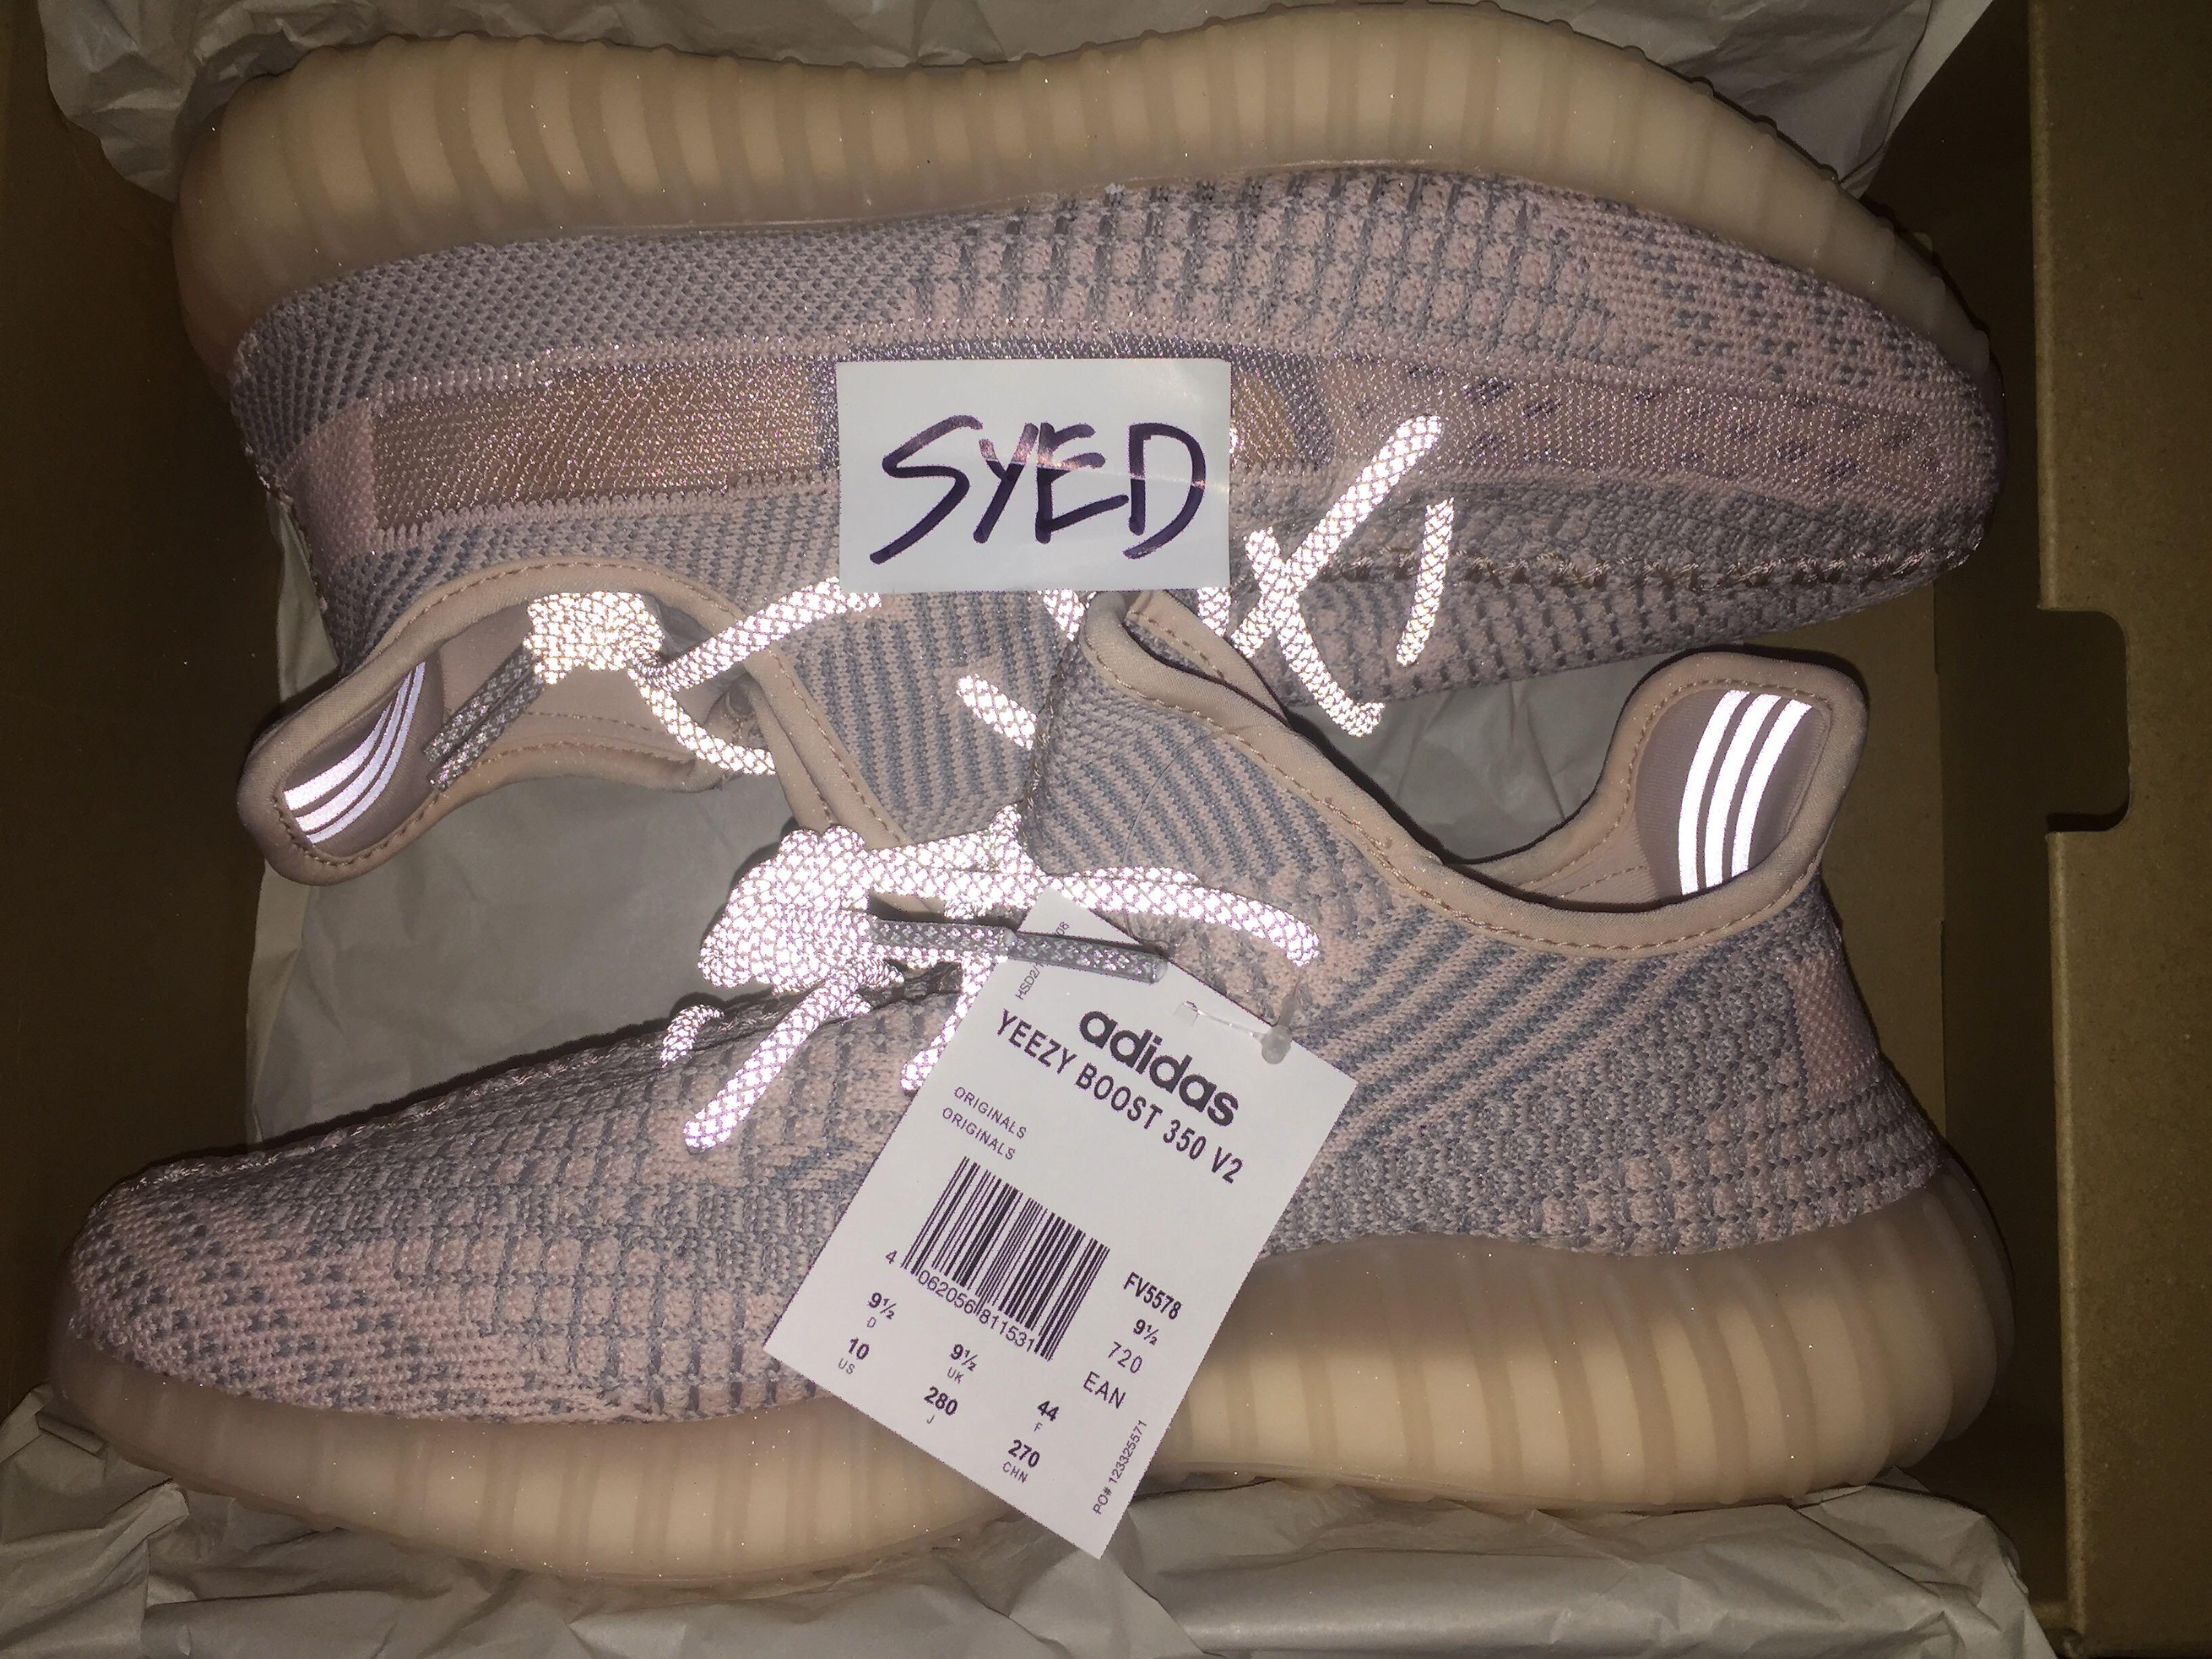 Adidas Yeezy Boost 350 V2 Synth, Men's Fashion, Footwear, Sneakers ...